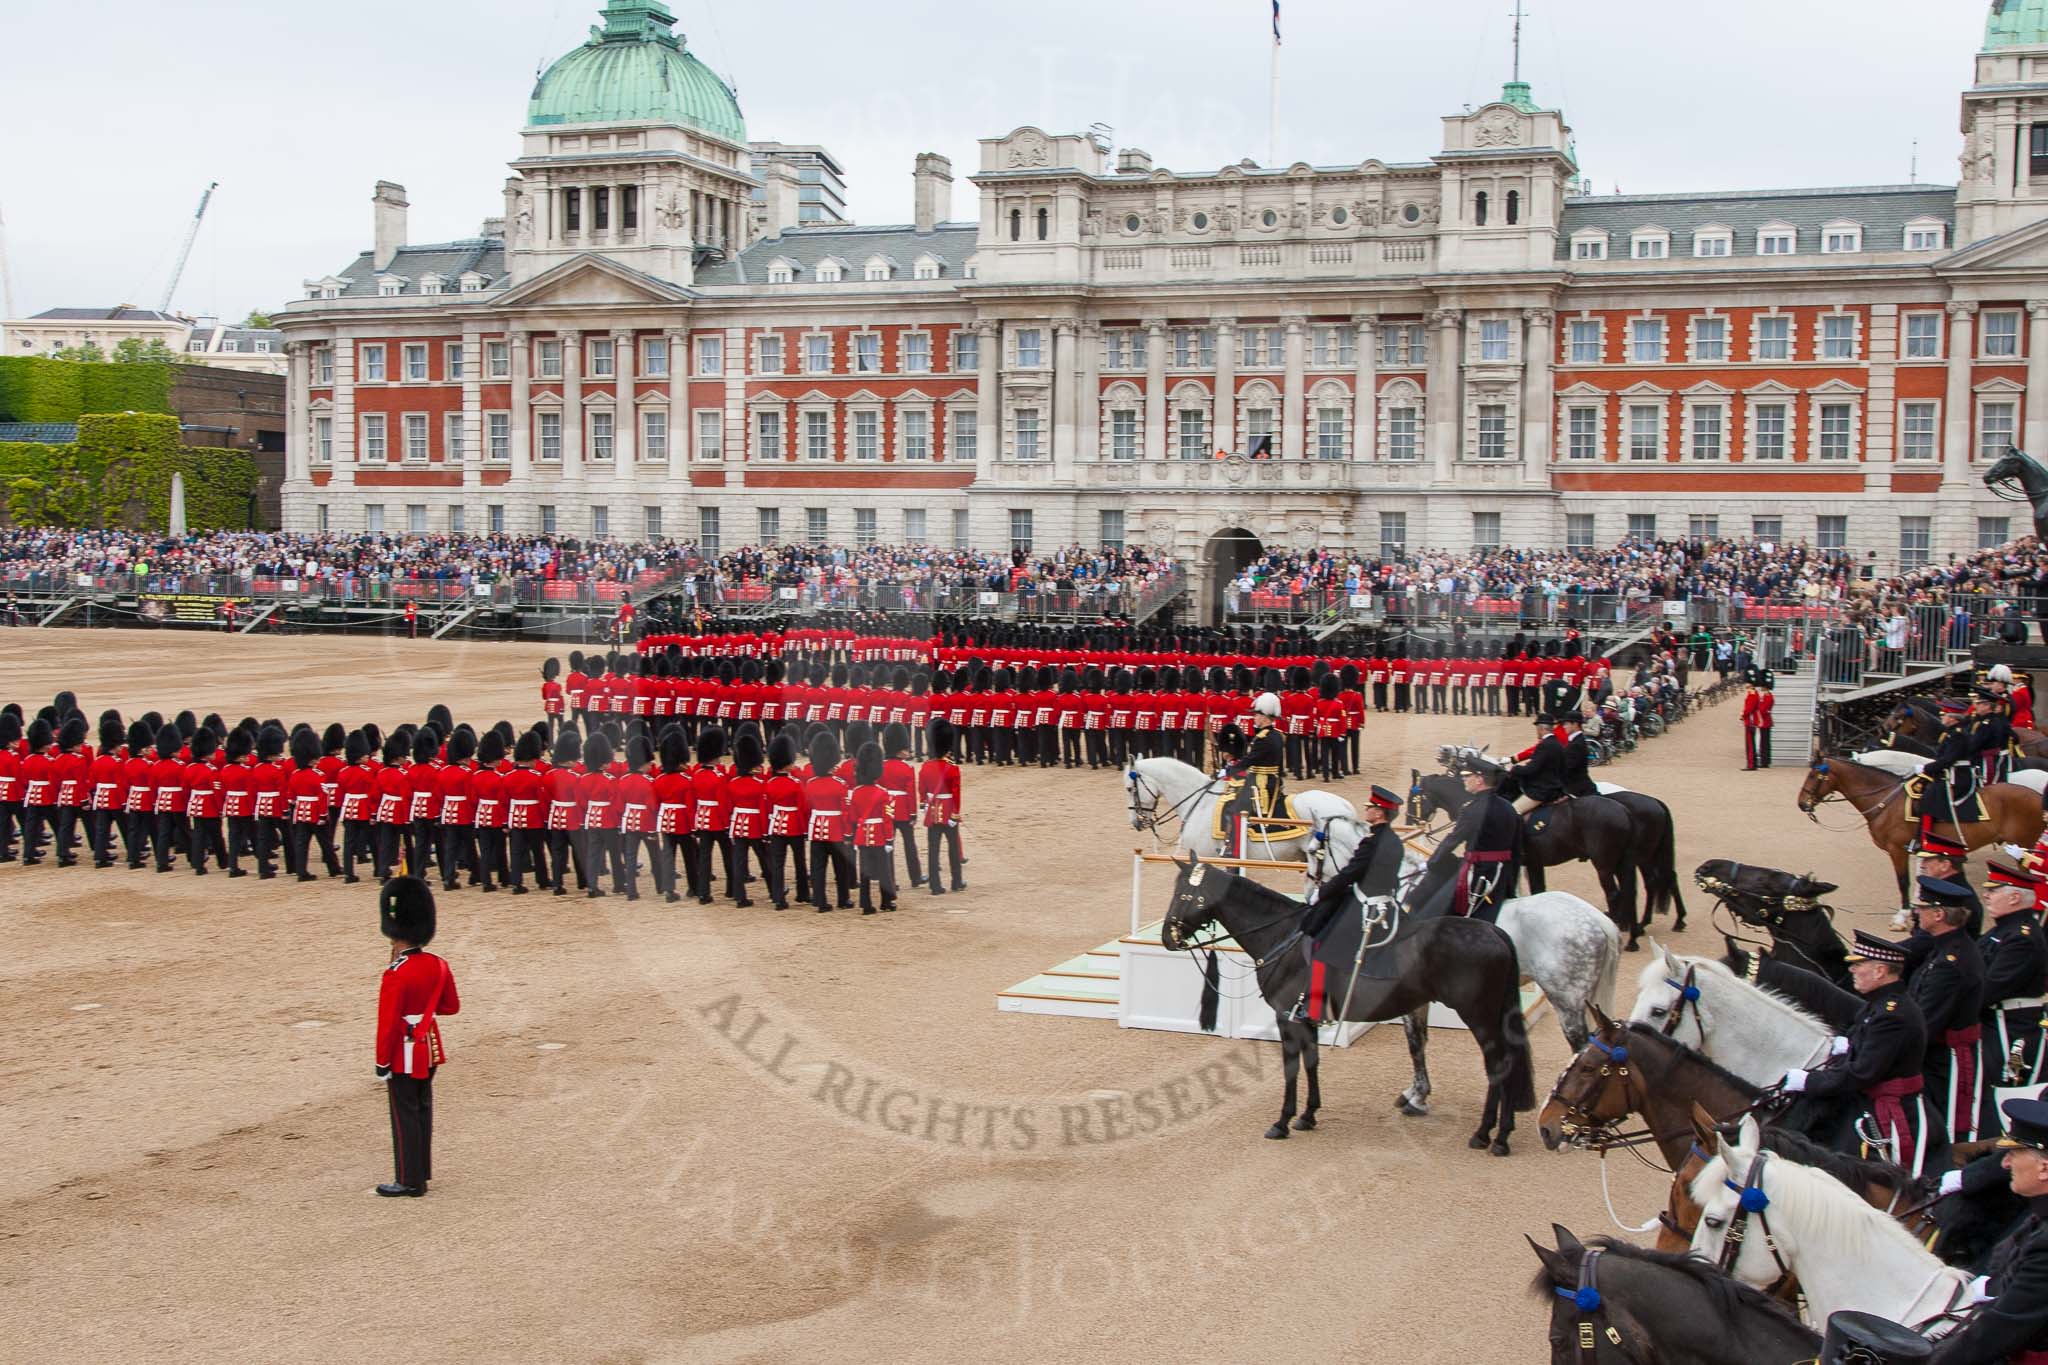 Major General's Review 2013: The guards change directions in the corners of Horse Guards Parade not by marching around the corner, but by forming new lines of guardsmen at a right angle to the previous direction..
Horse Guards Parade, Westminster,
London SW1,

United Kingdom,
on 01 June 2013 at 11:36, image #515